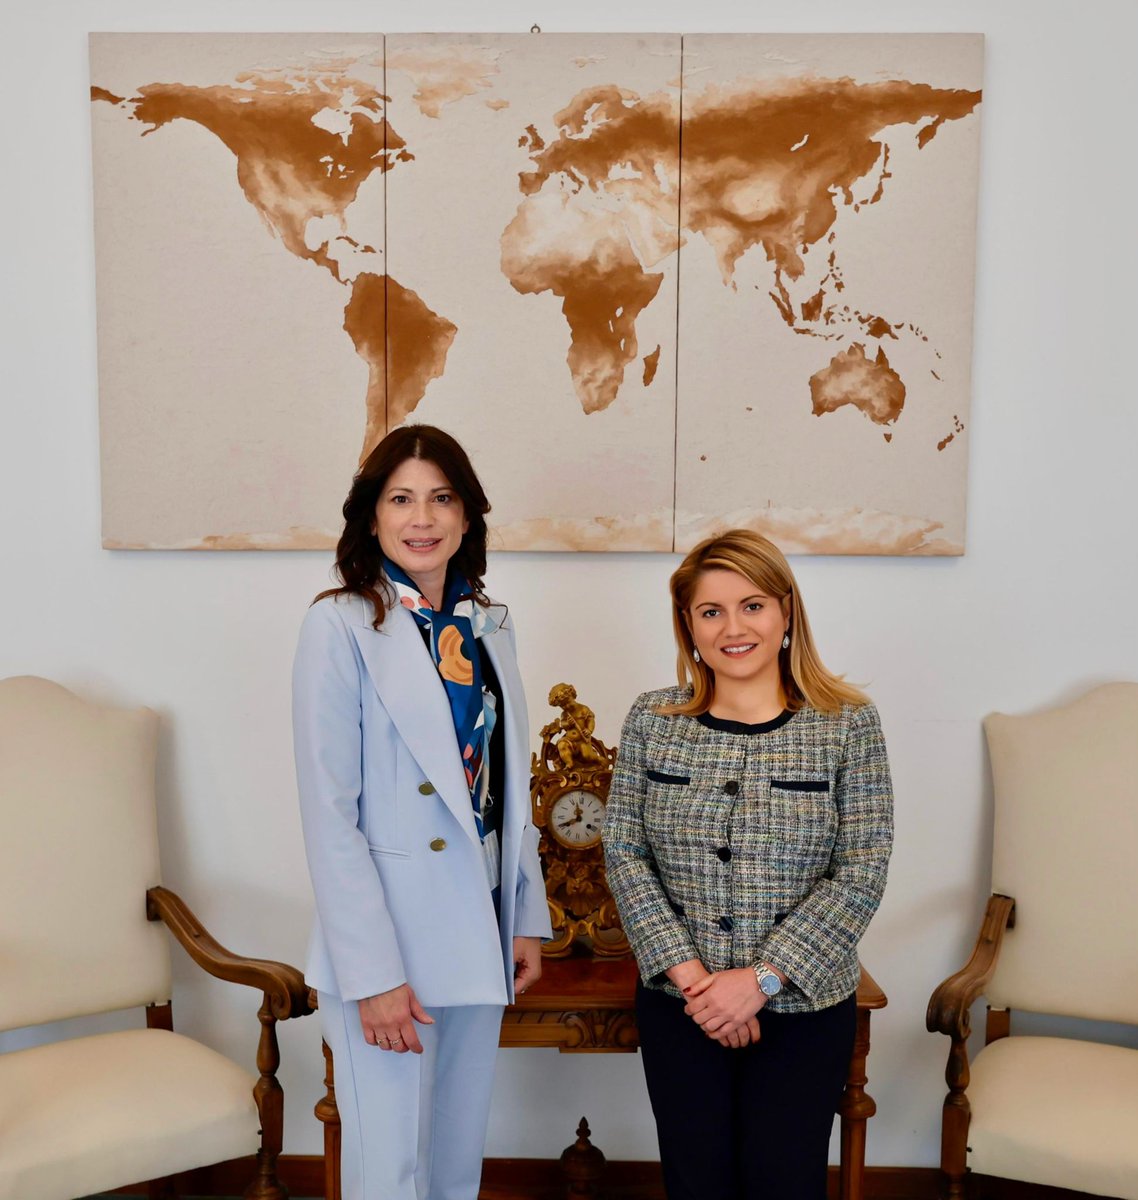 U/S @tripodimaria met with @irenefellin, Special Representative of @NATO SG, @jensstoltenberg. Appreciation for the Atlantic Alliance's new pluriannual strategy on Women, Peace and Security Agenda, which will be adopted at the upcoming NATO Summit in July in Washington.